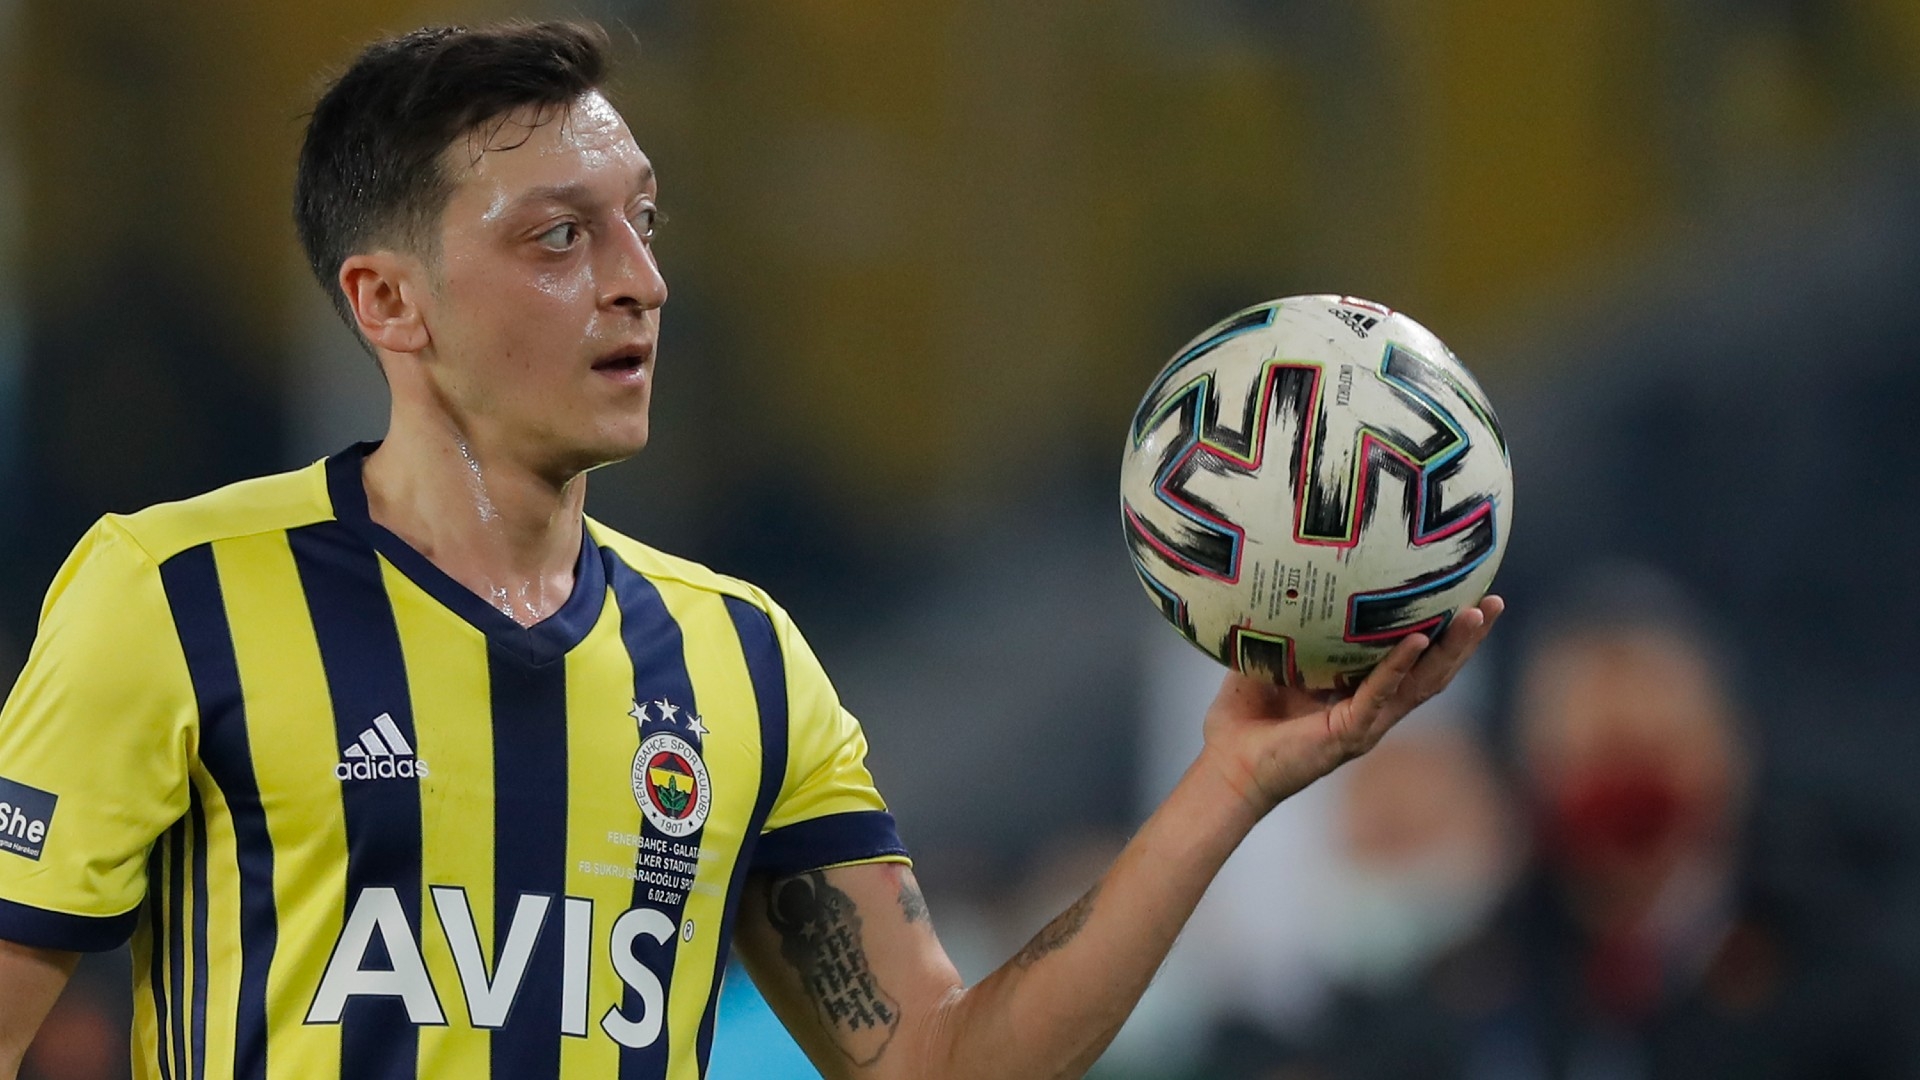 Mesut Ozil in Esports: Ex-Arsenal star responds to rumors of venturing into professional eSports upon retiring from football